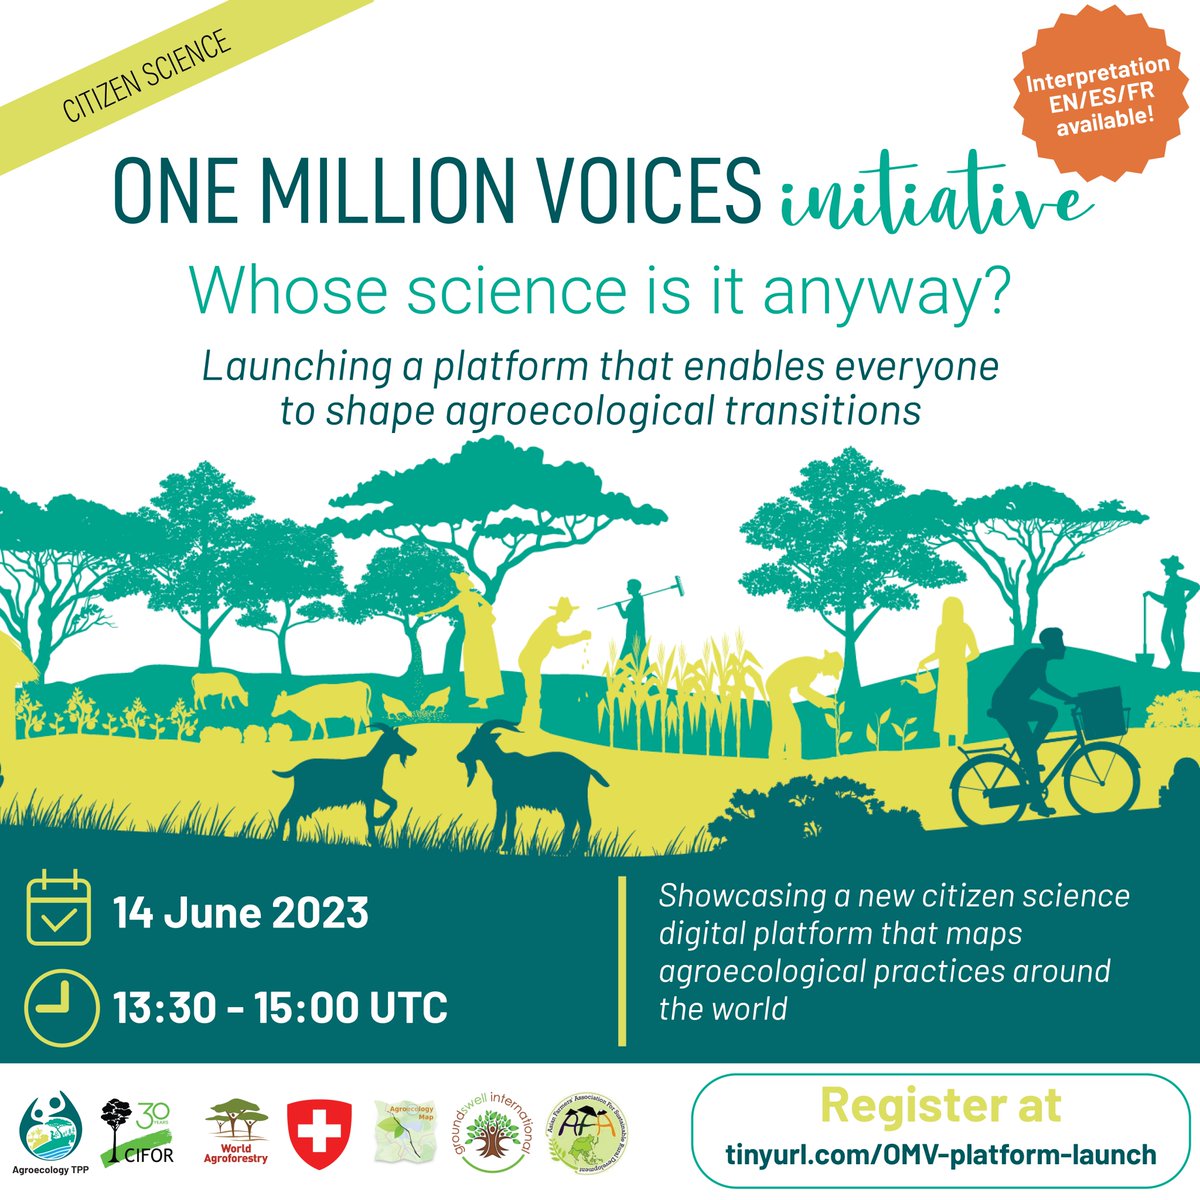 The Agroecology TPP is excited to launch a #citizenscience platform to allow farmers, producers, consumers & anyone practising #agroecology to participate fully in the agroecology movement around  the world.
Join the launch webinar on 14 June: tinyurl.com/OMV-platform-l…
#aeTPP